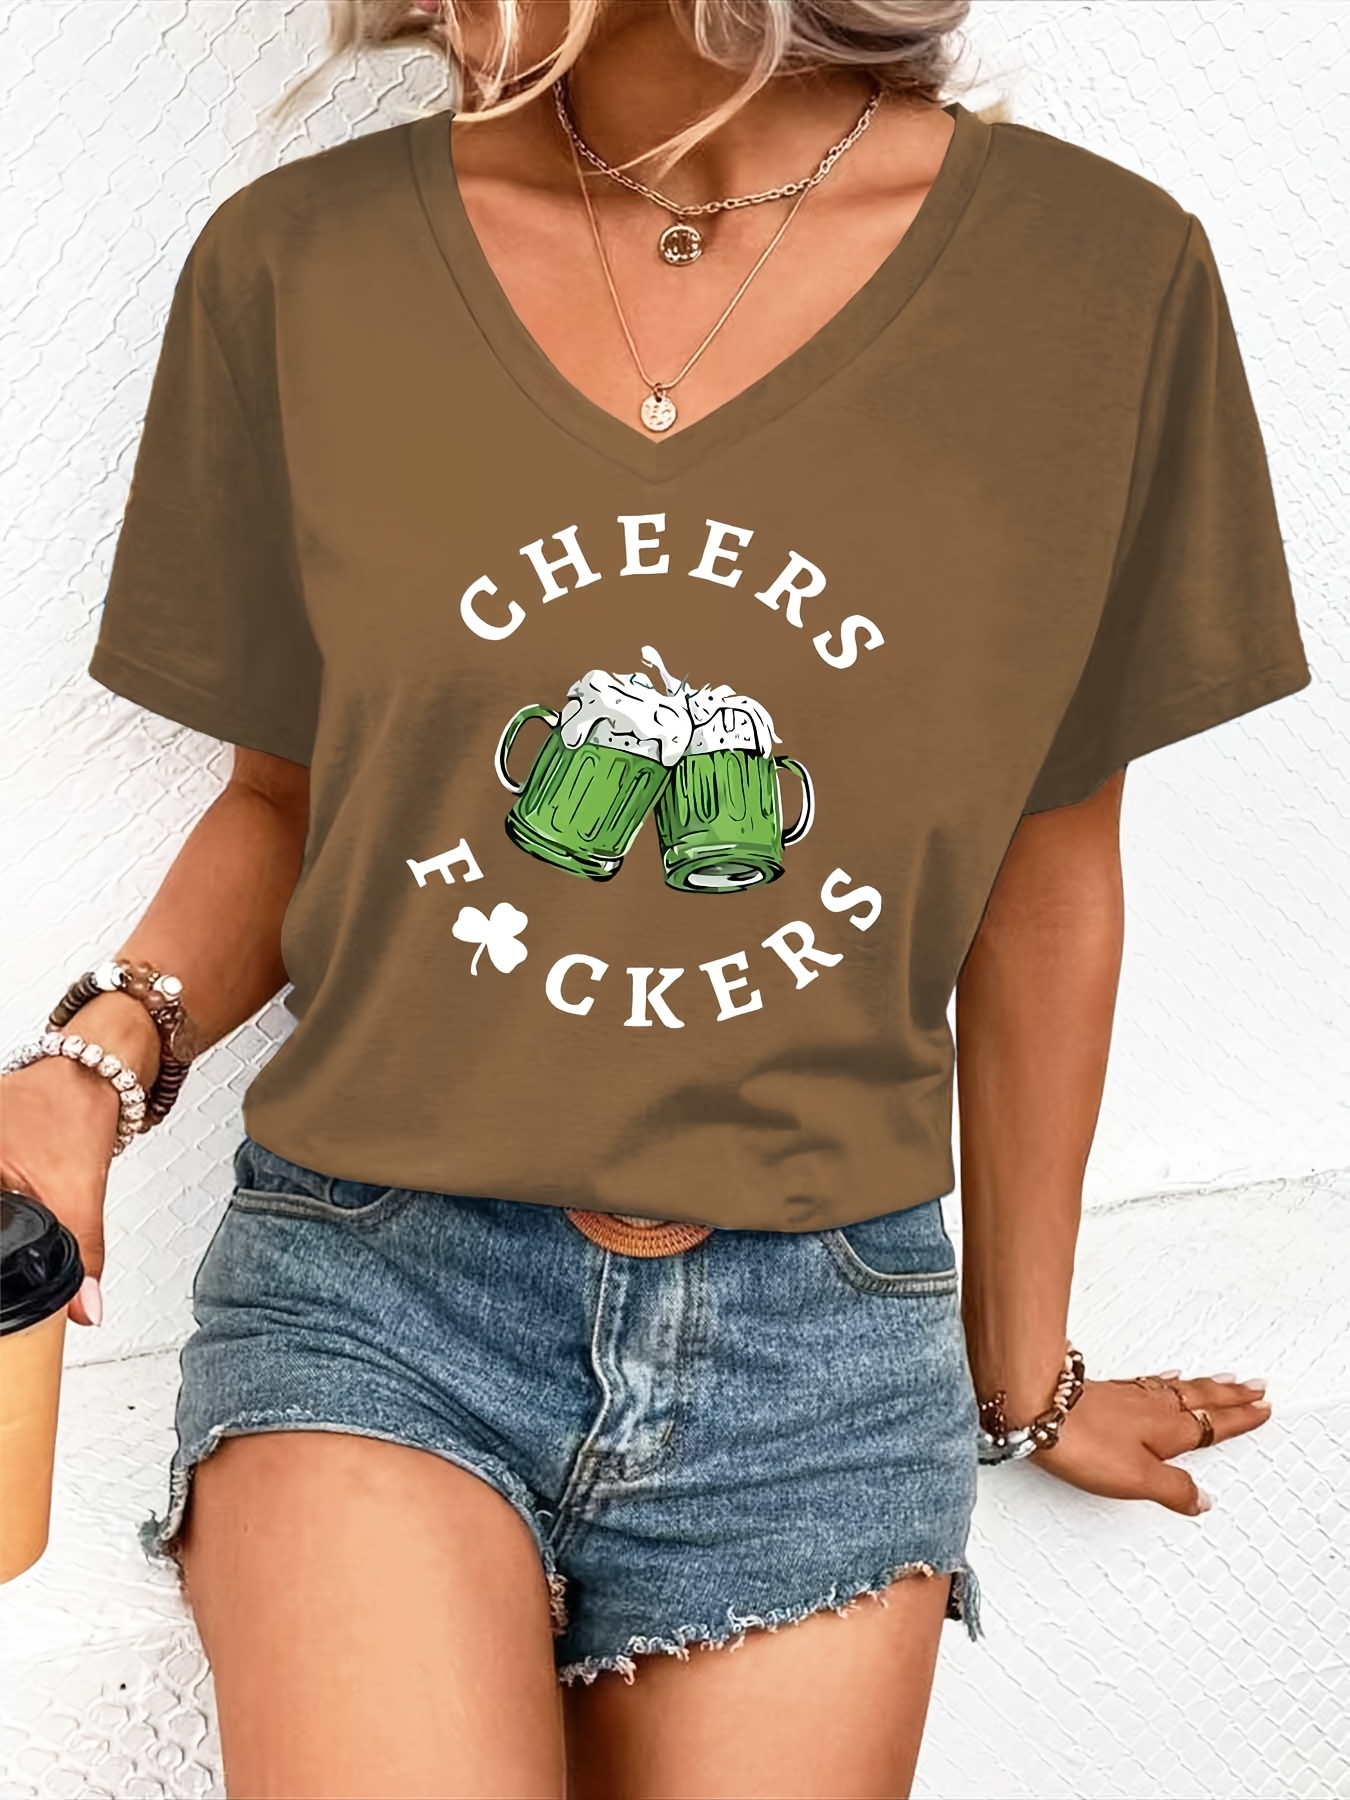 drink letter print casual t shirt v neck short sleeves stretchy sports tee st patricks day womens comfy tops details 6